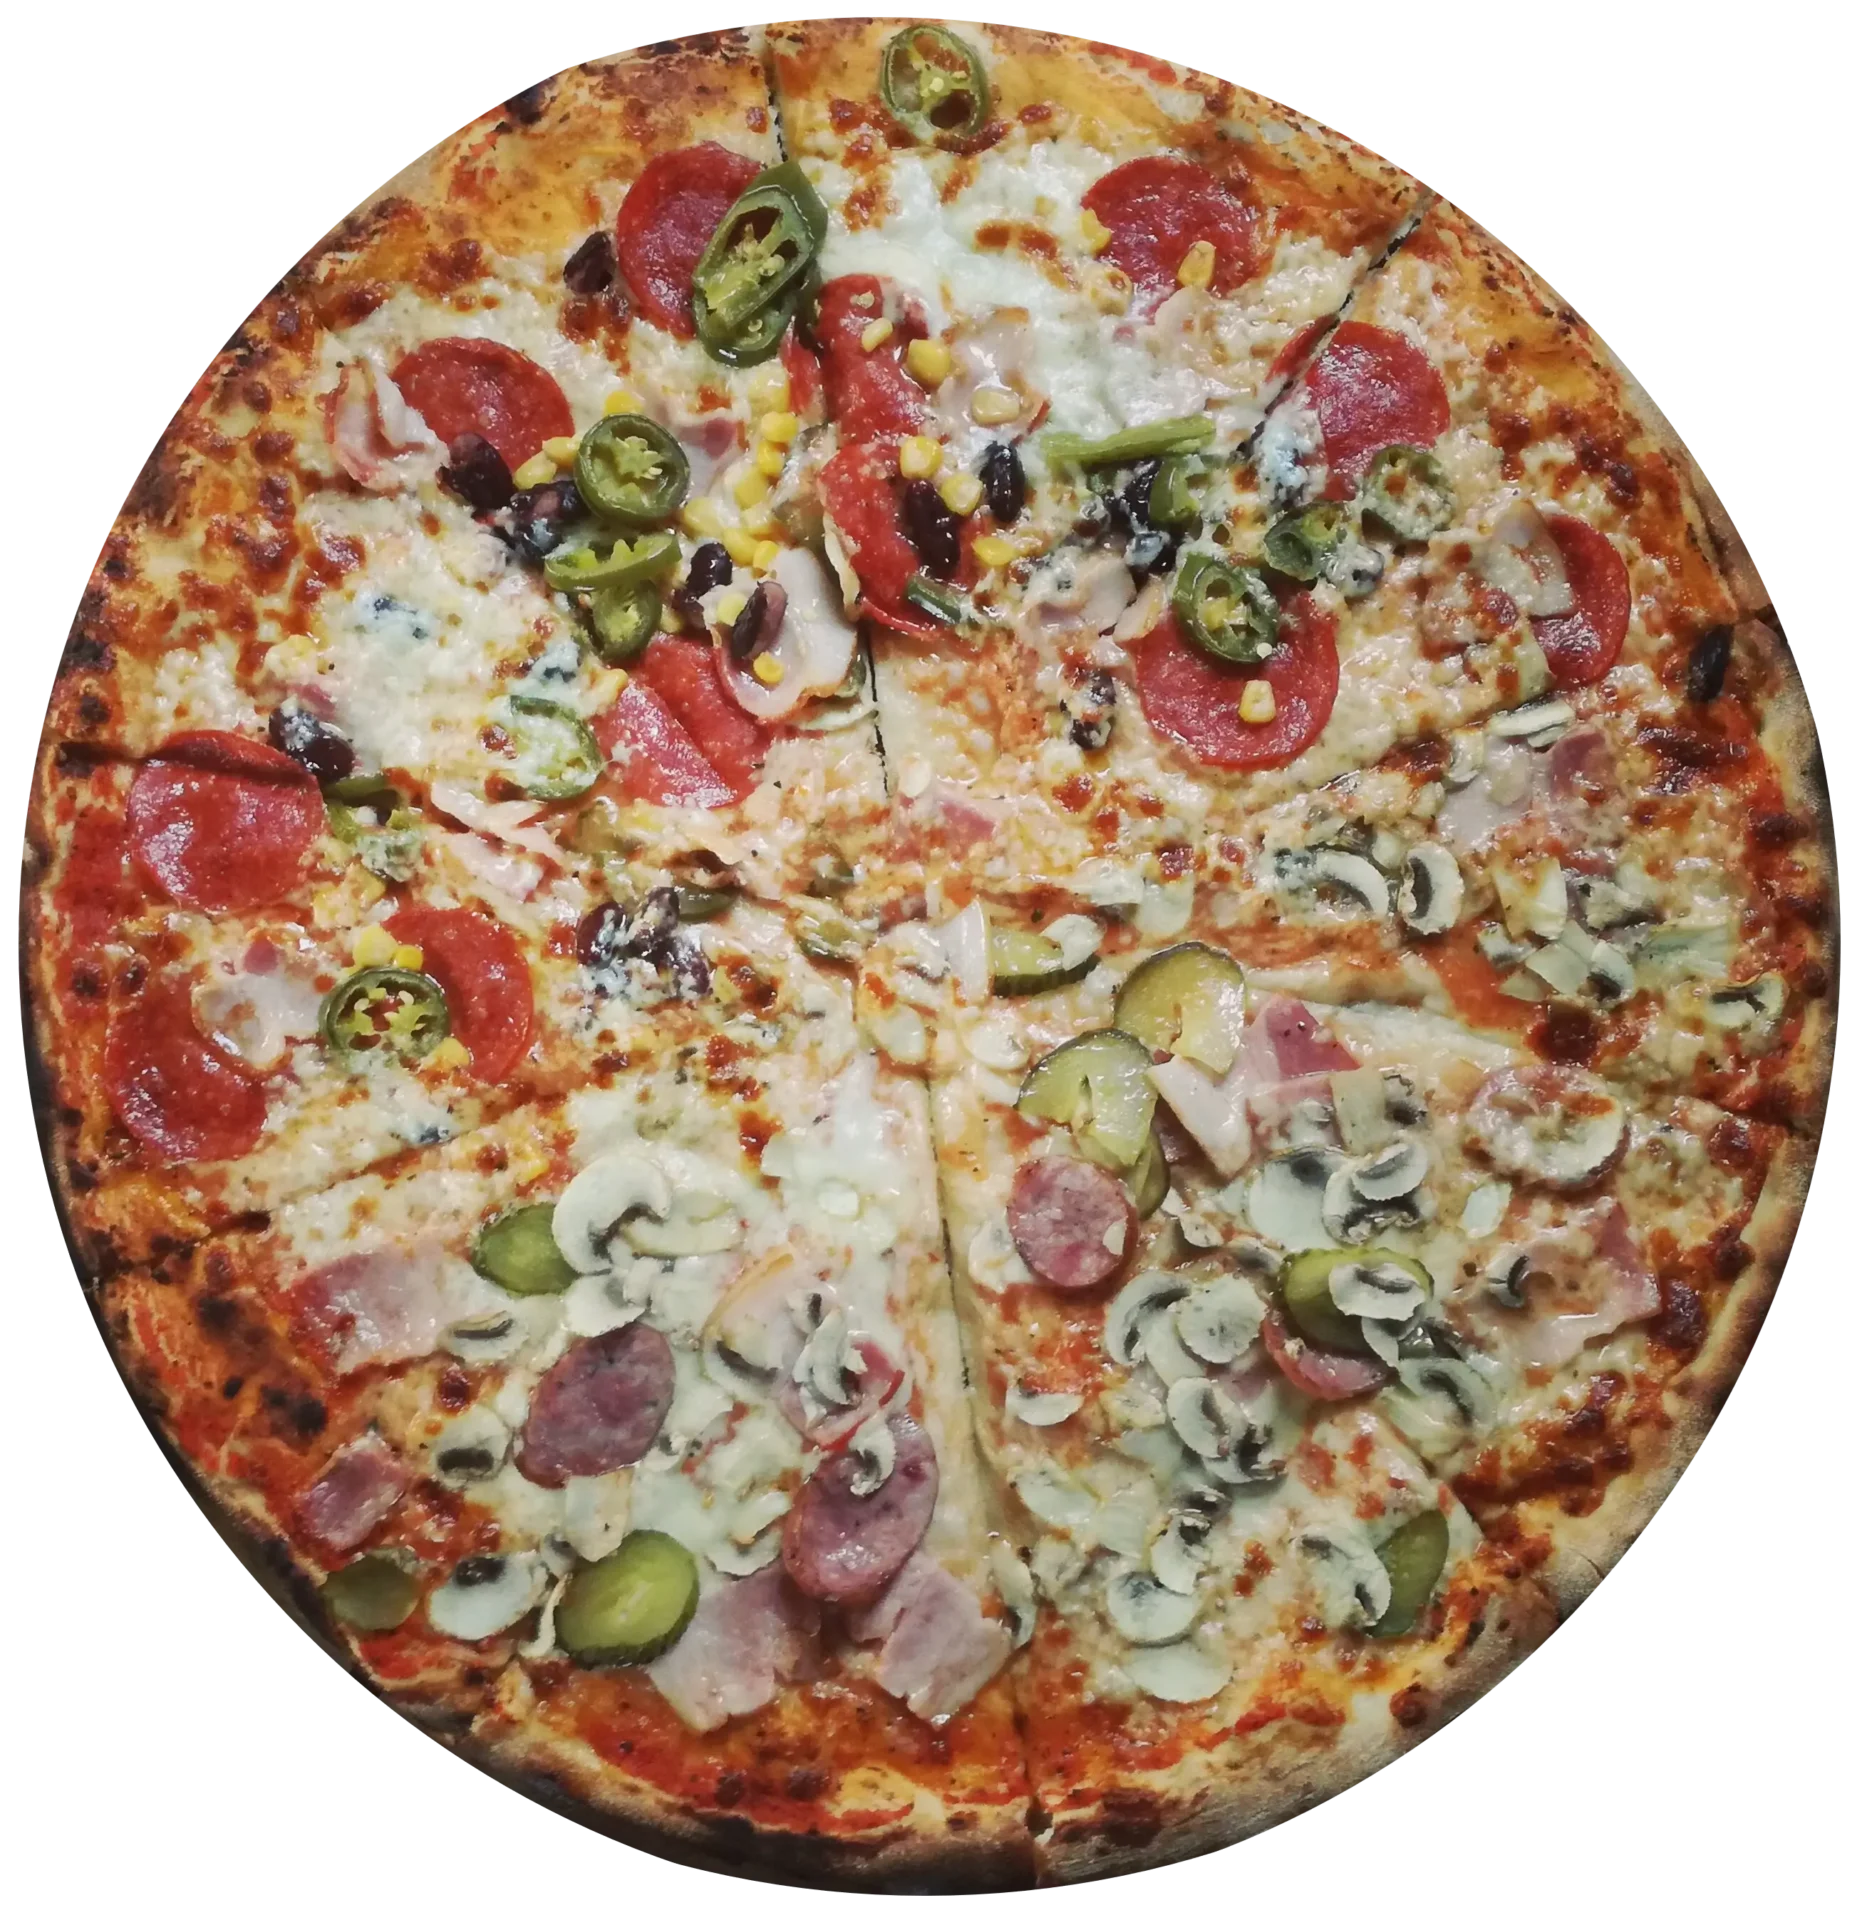 A pizza with many different toppings on it.